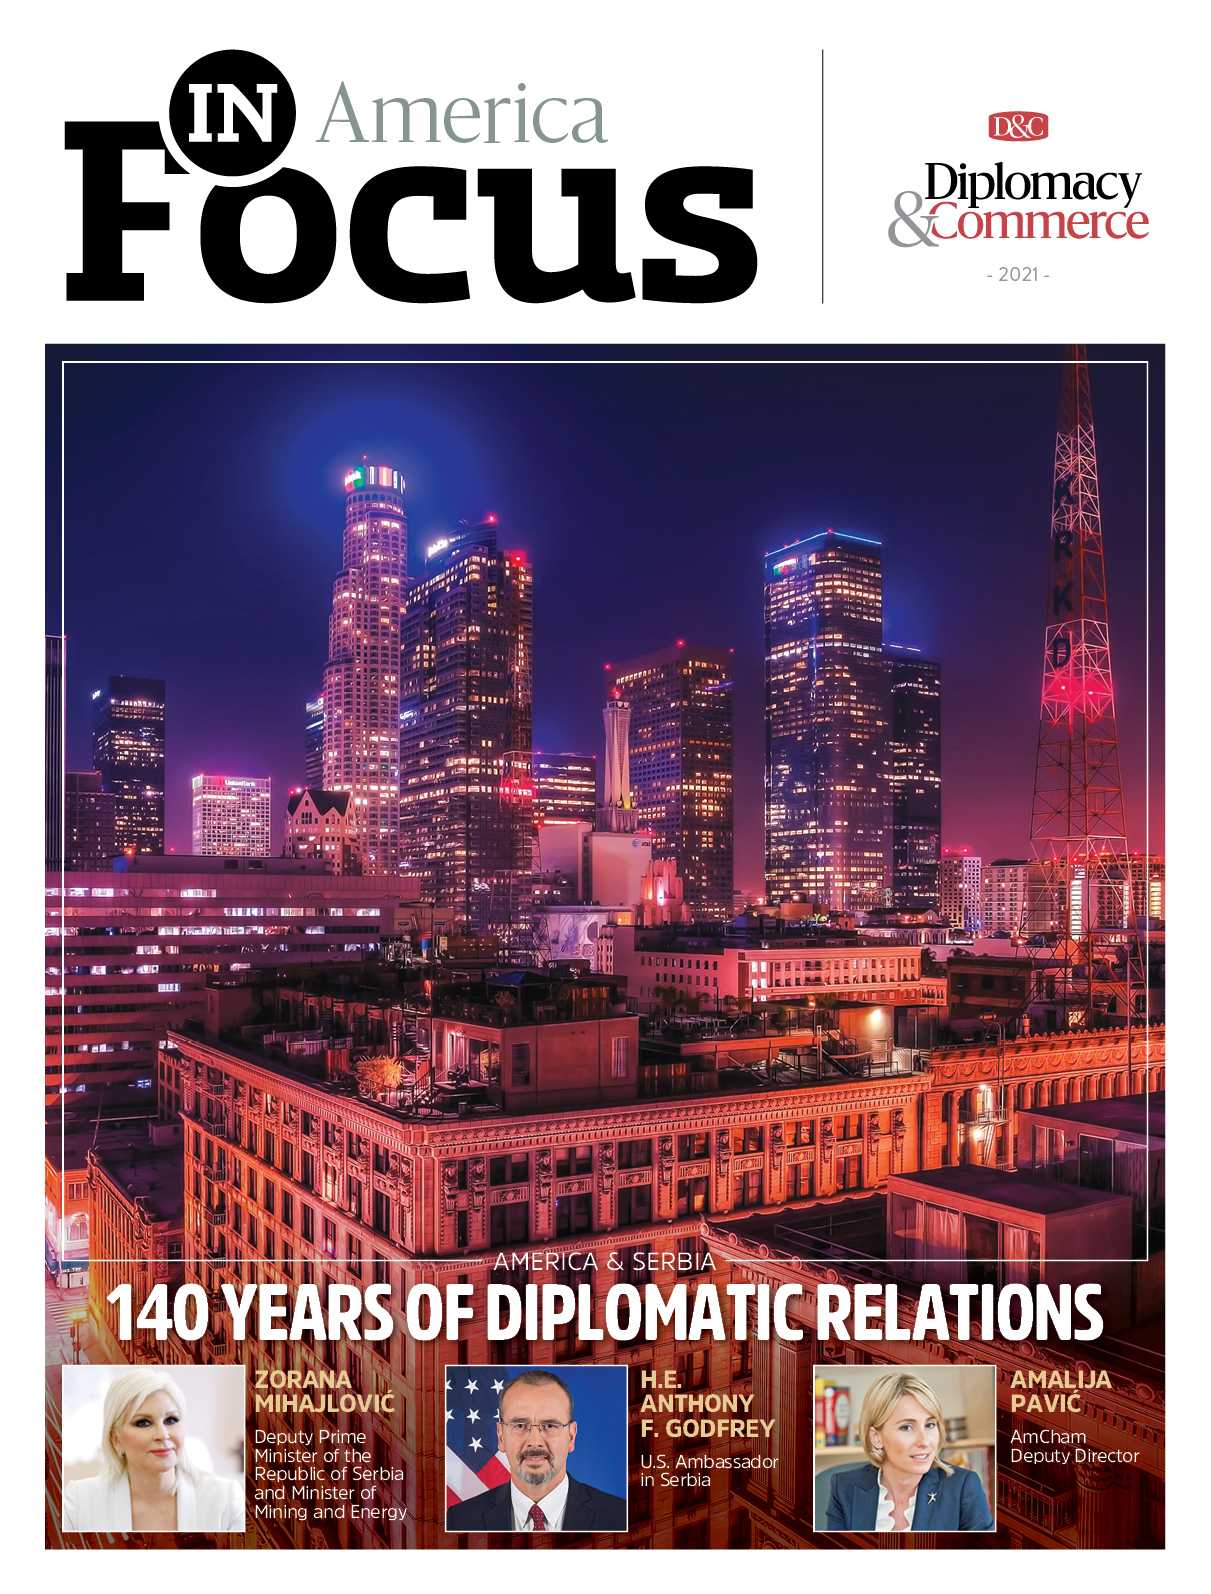 DandC - diplomacy and commerce - In Focus - USA - 2021